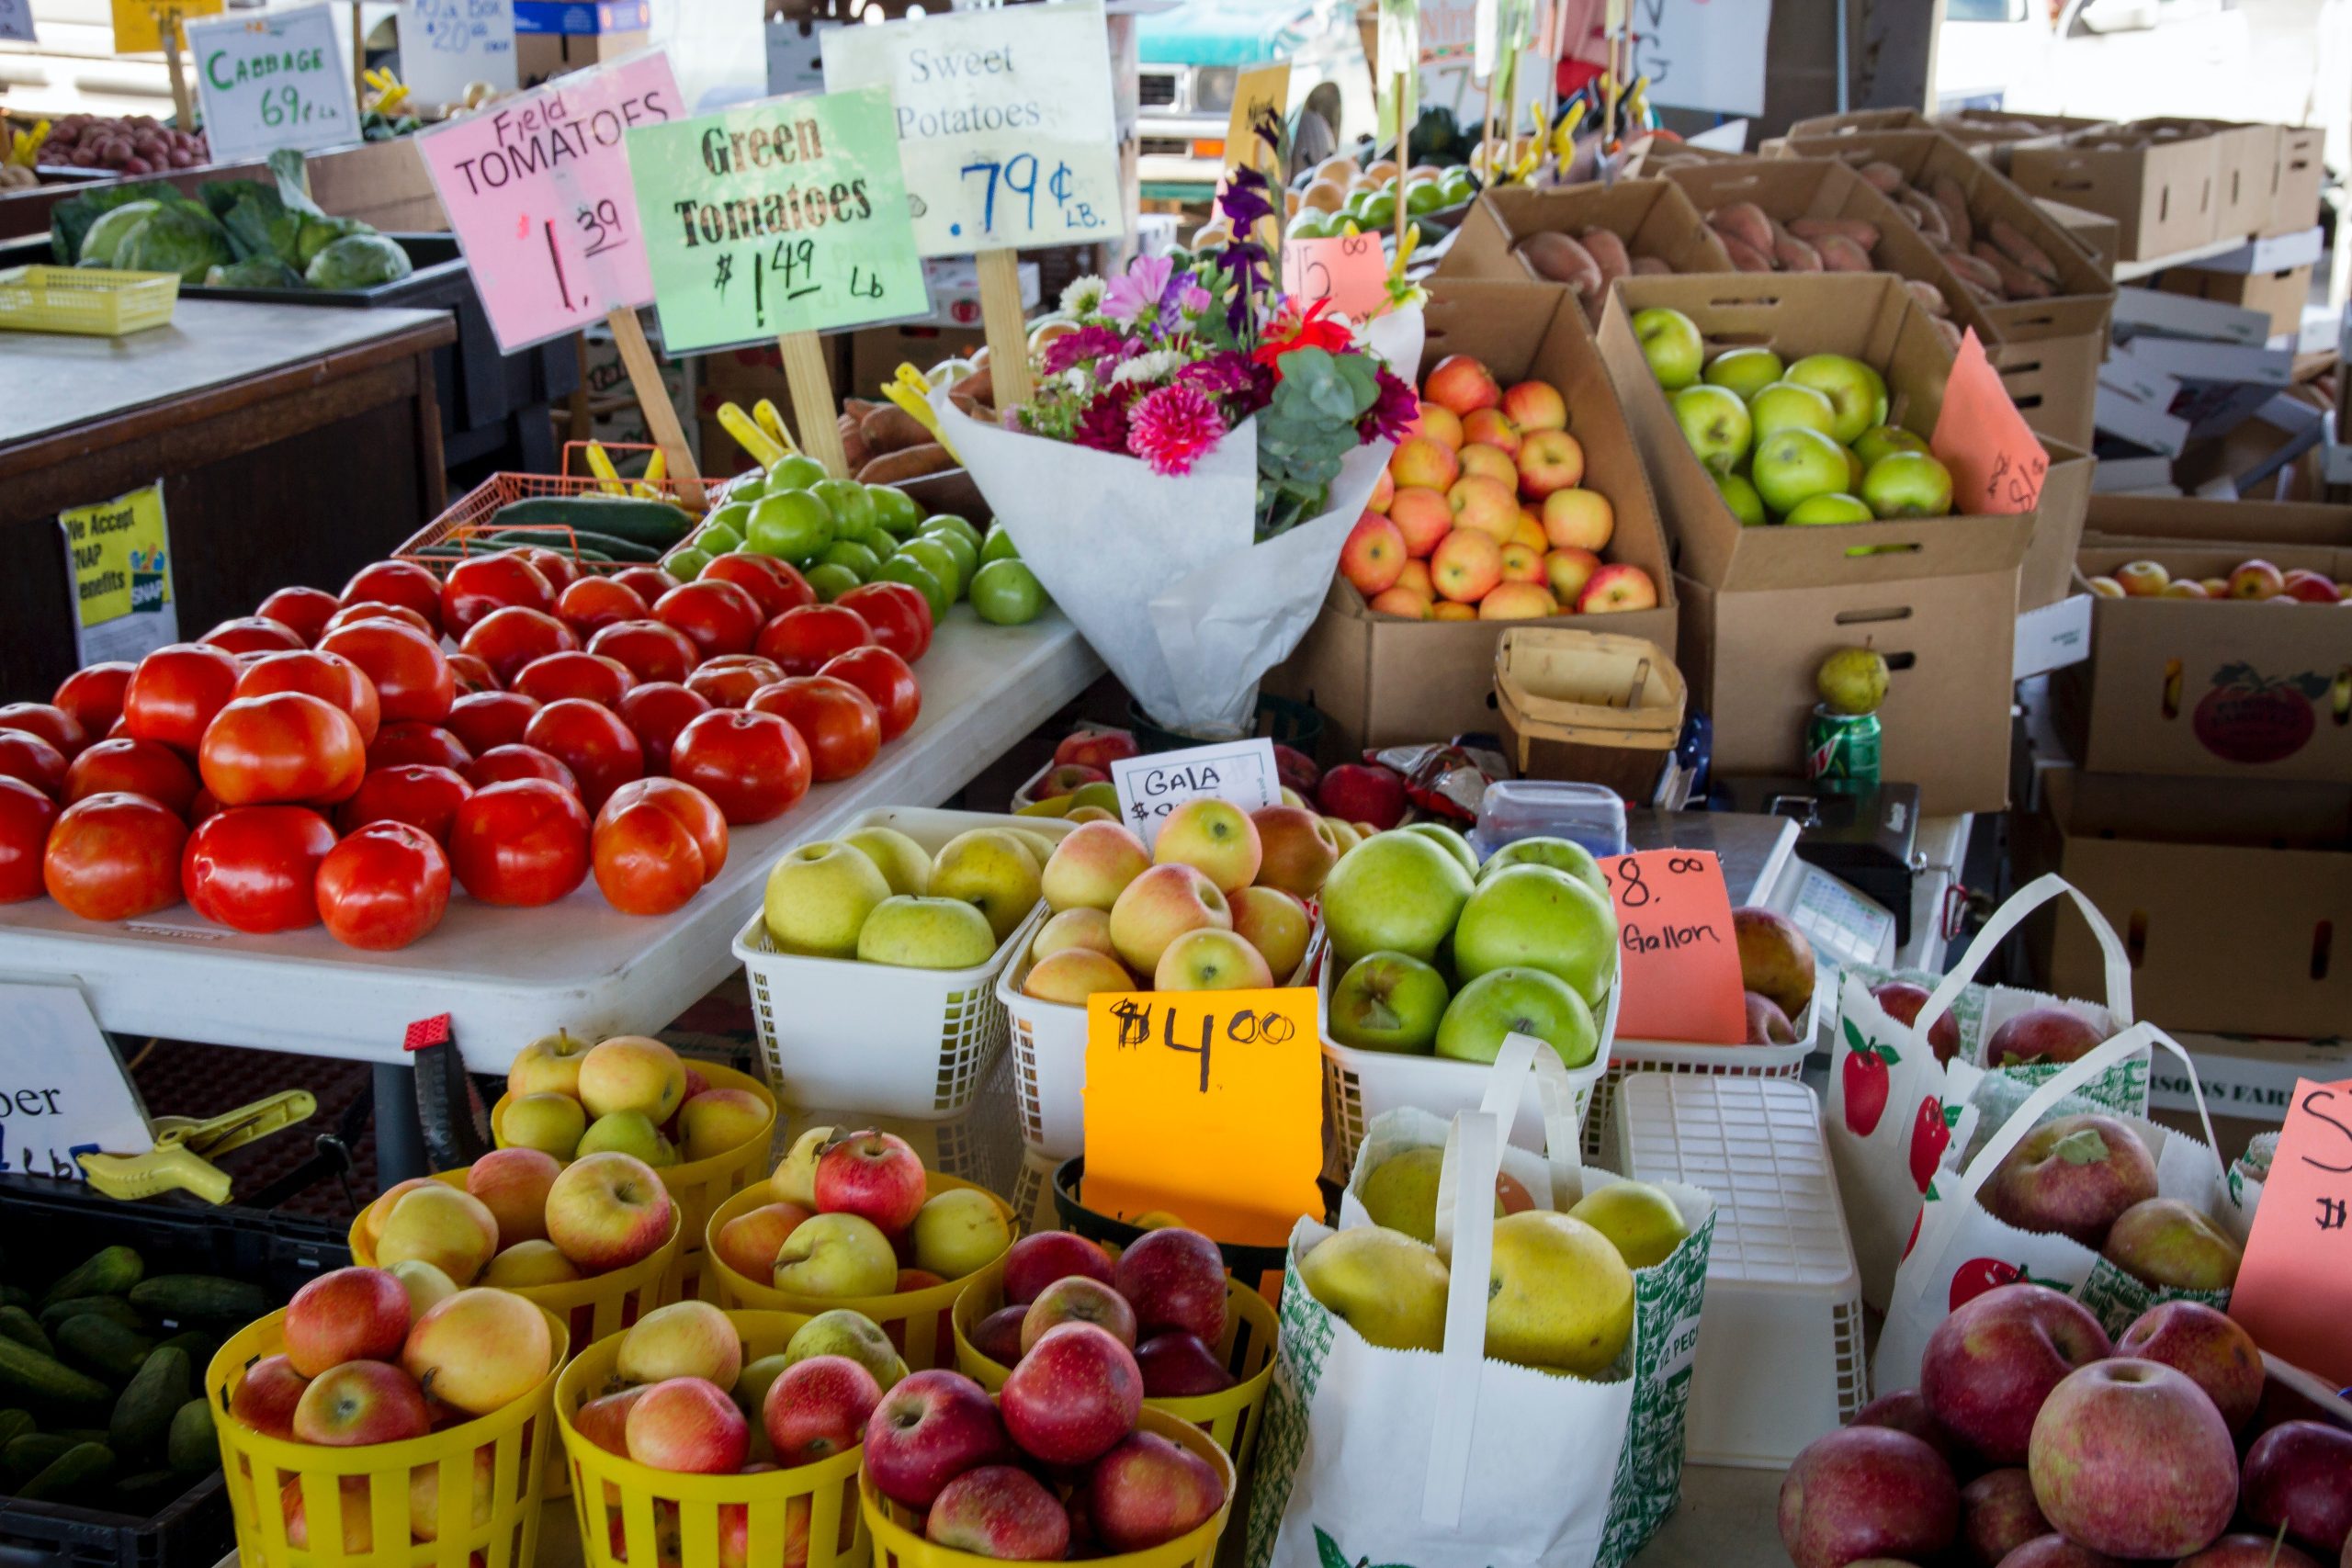 Assorted variety of fruits on a market: field tomatoes at $1.39, green tomatoes at $1.49, sweetnpotatoes at $0.79.